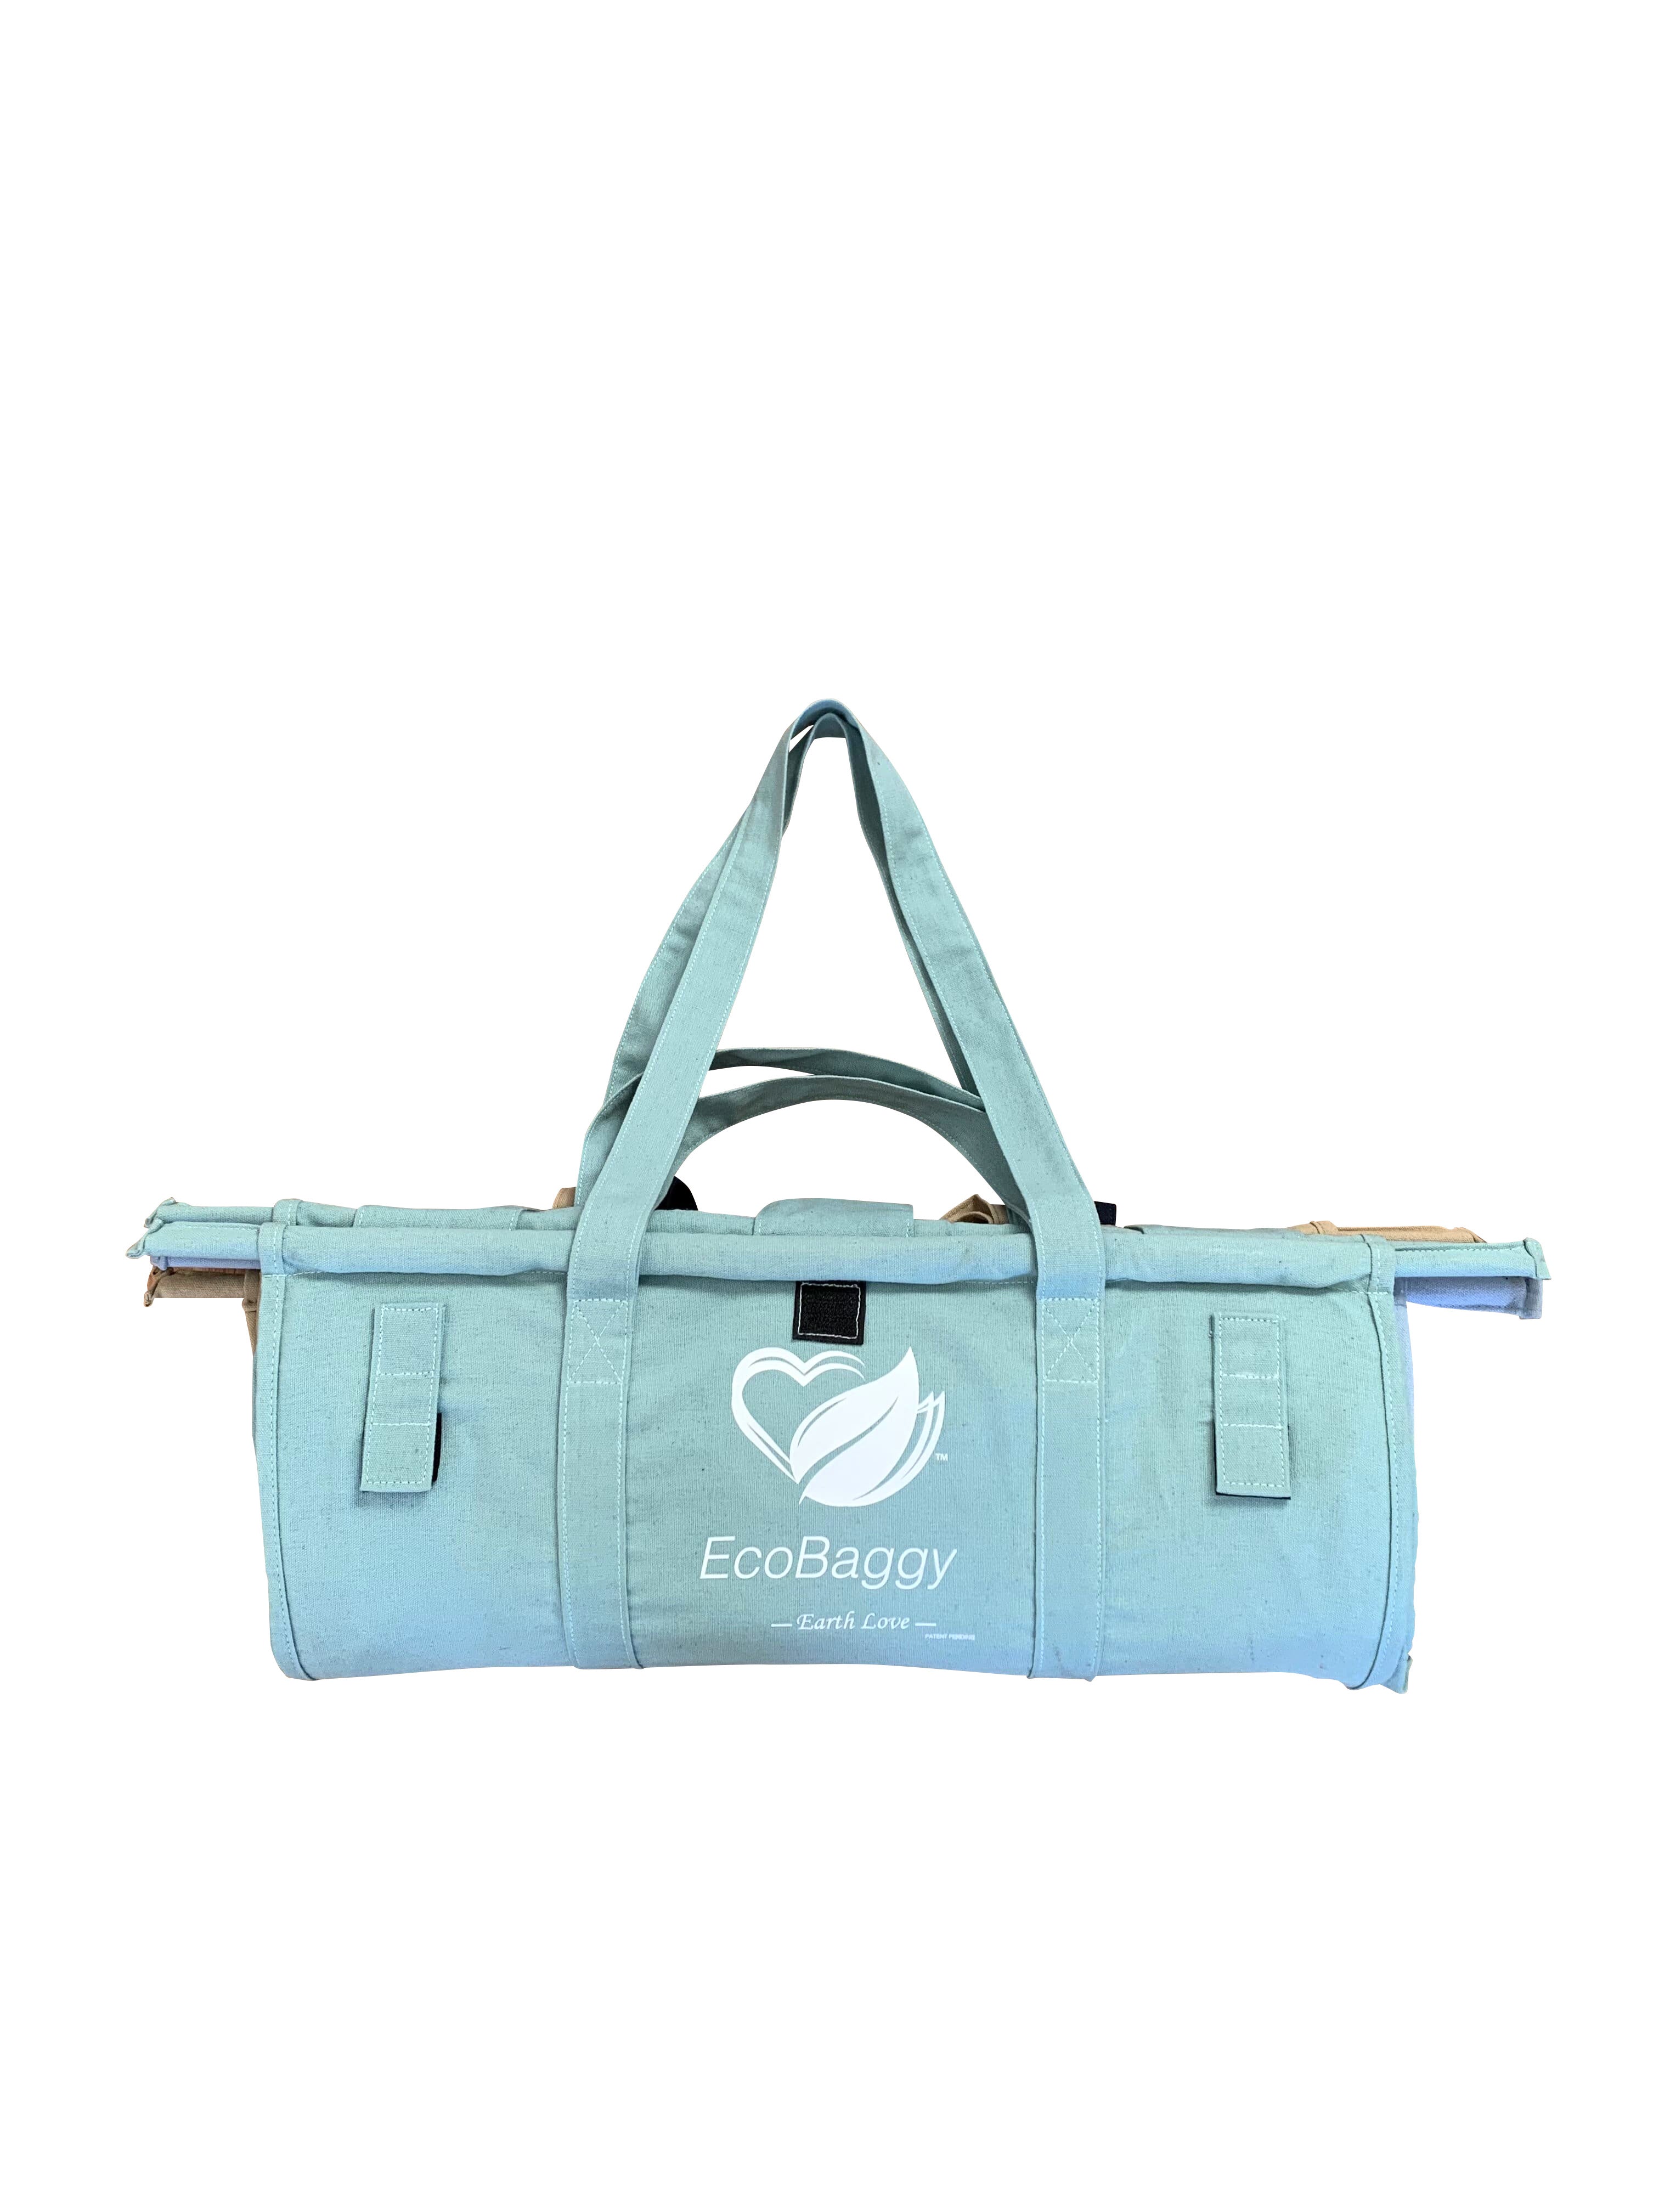 EcoBaggy Set - 4 Reusable Bags with a PEVA Lined Cooler Bag